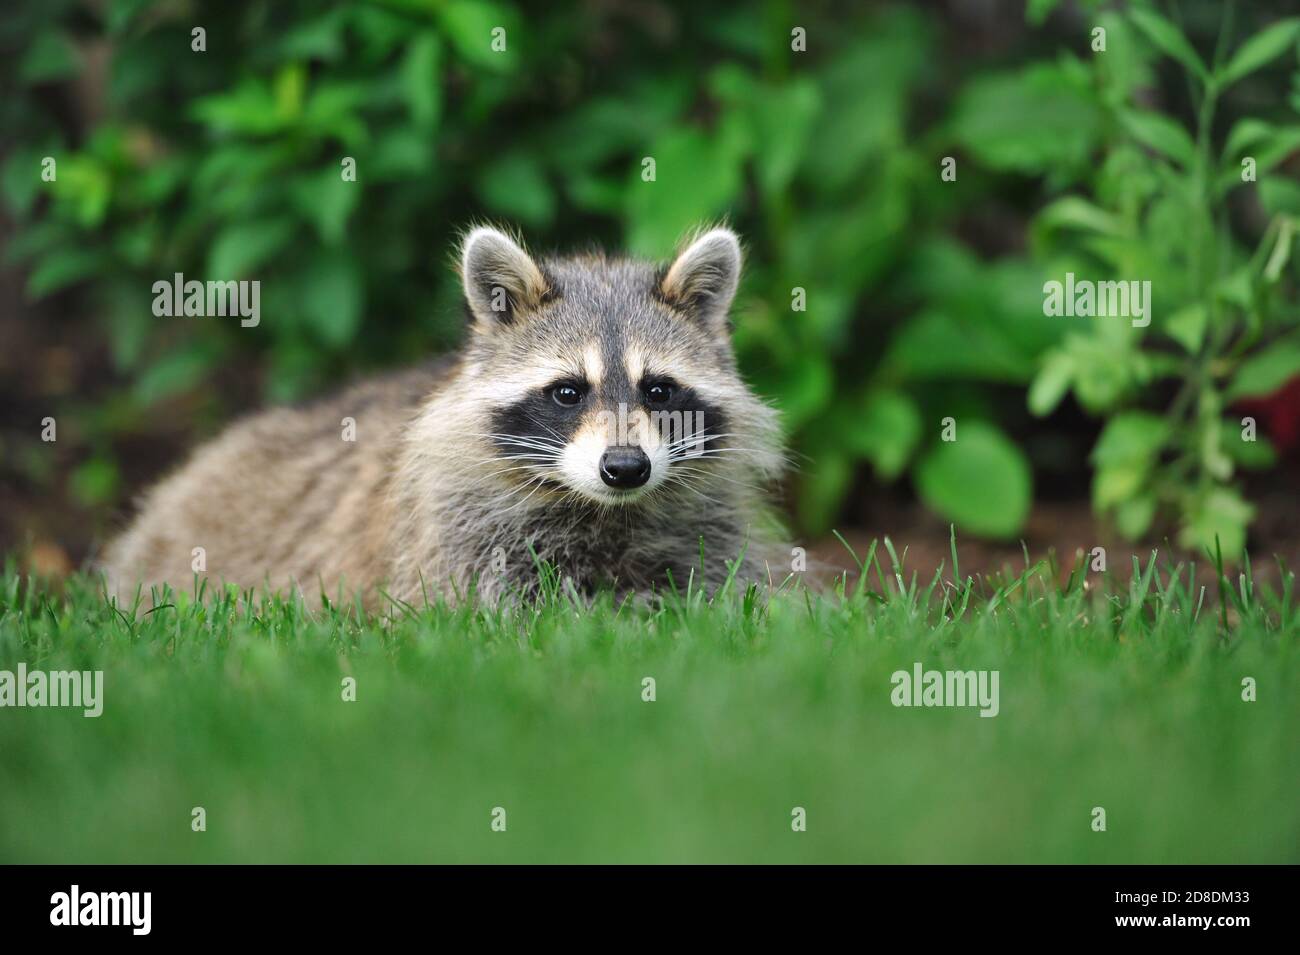 A raccoon sitting in the grass Stock Photo